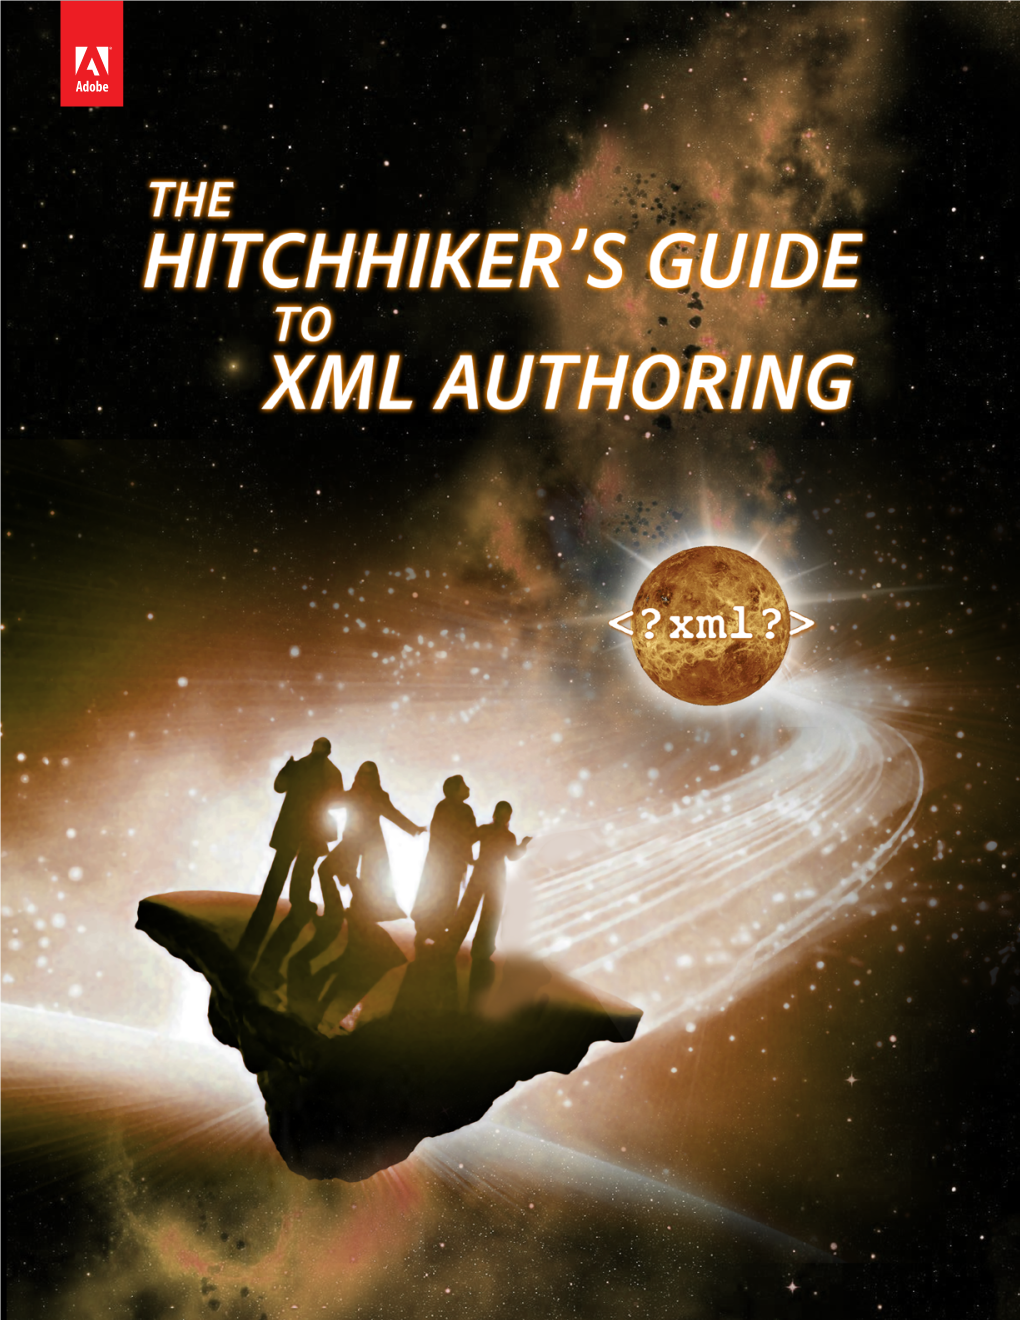 The Hitchhiker's Guide to XML Authoring